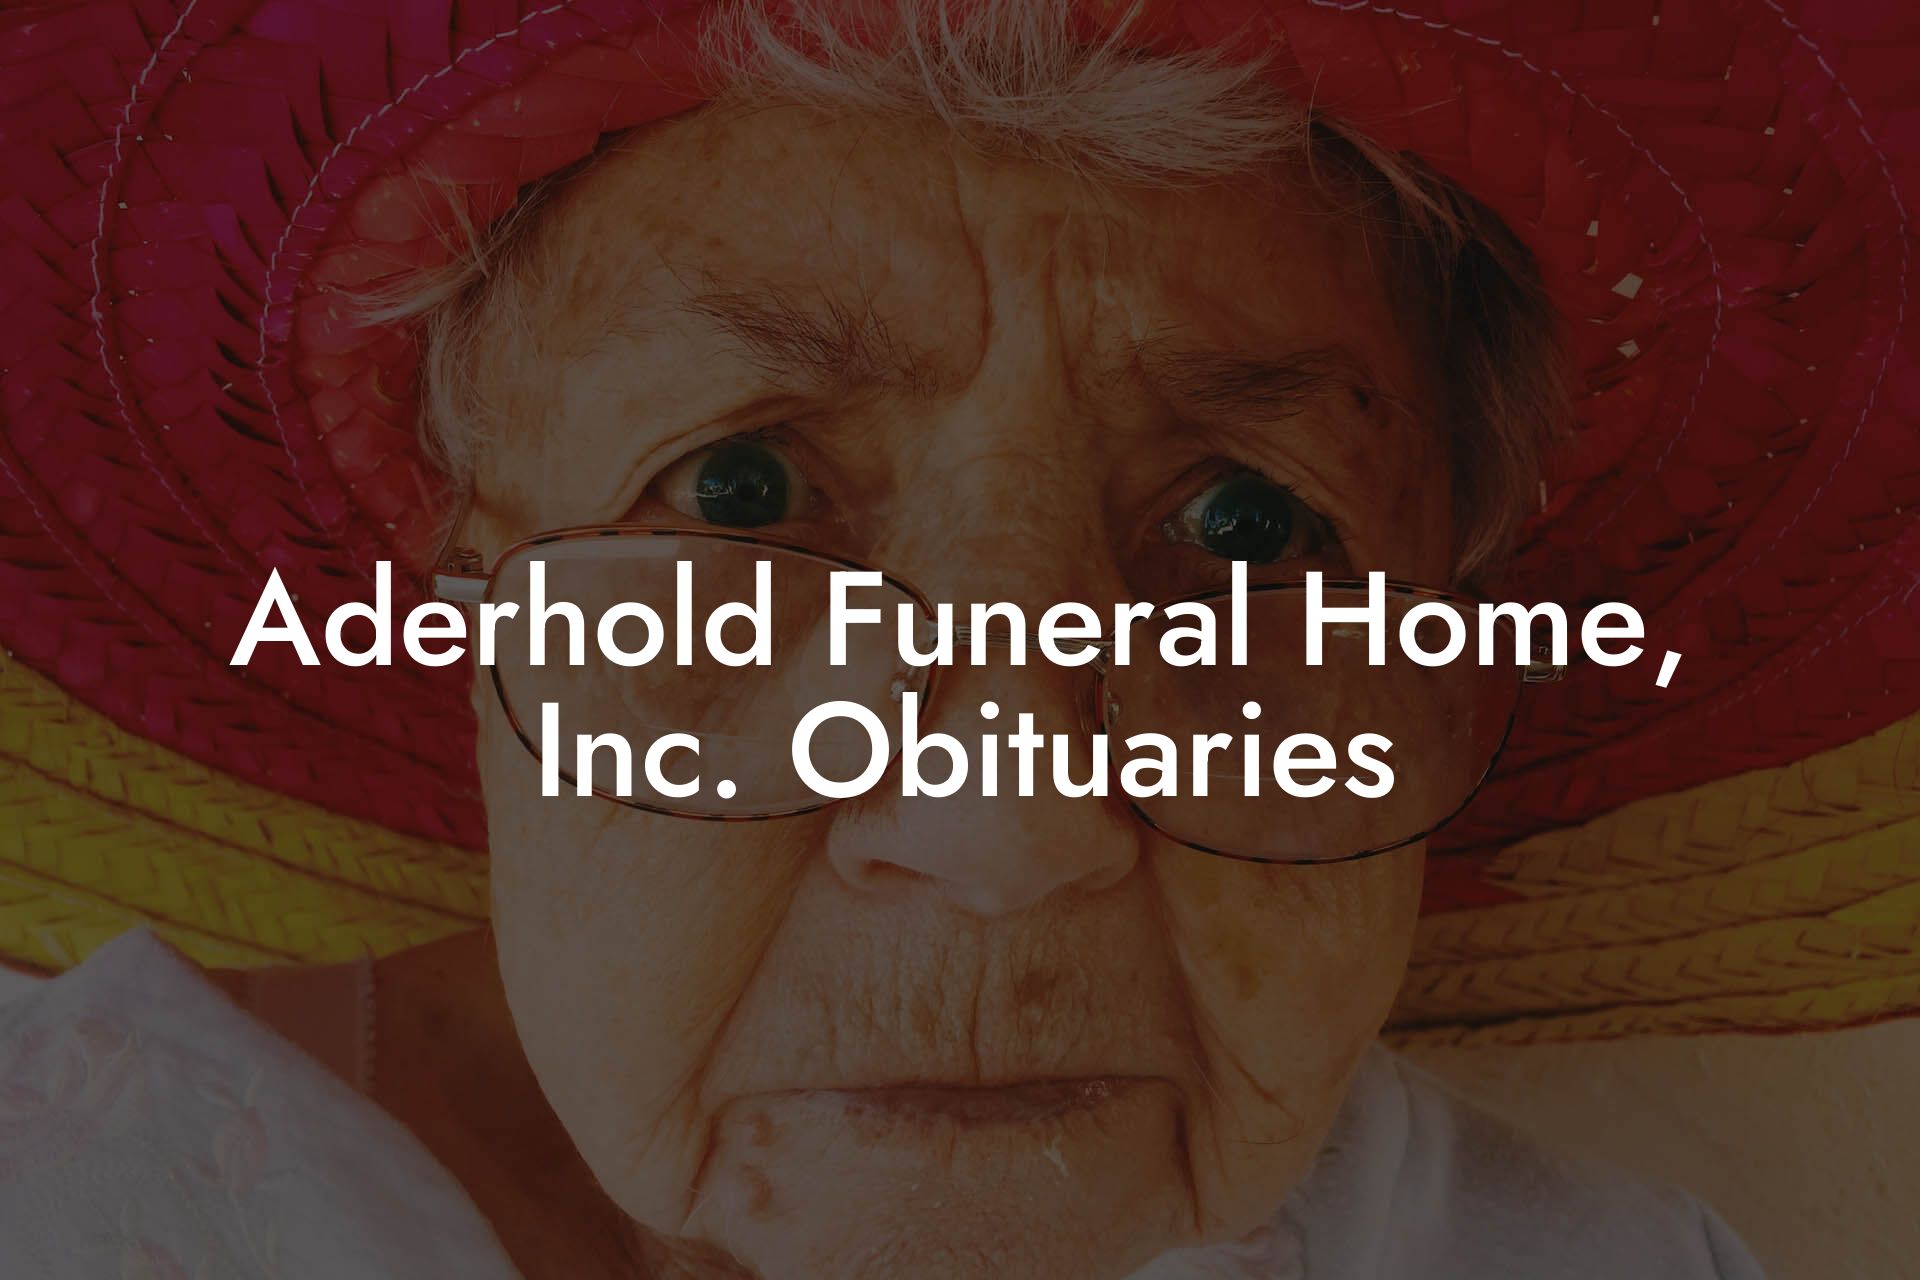 Aderhold Funeral Home, Inc. Obituaries